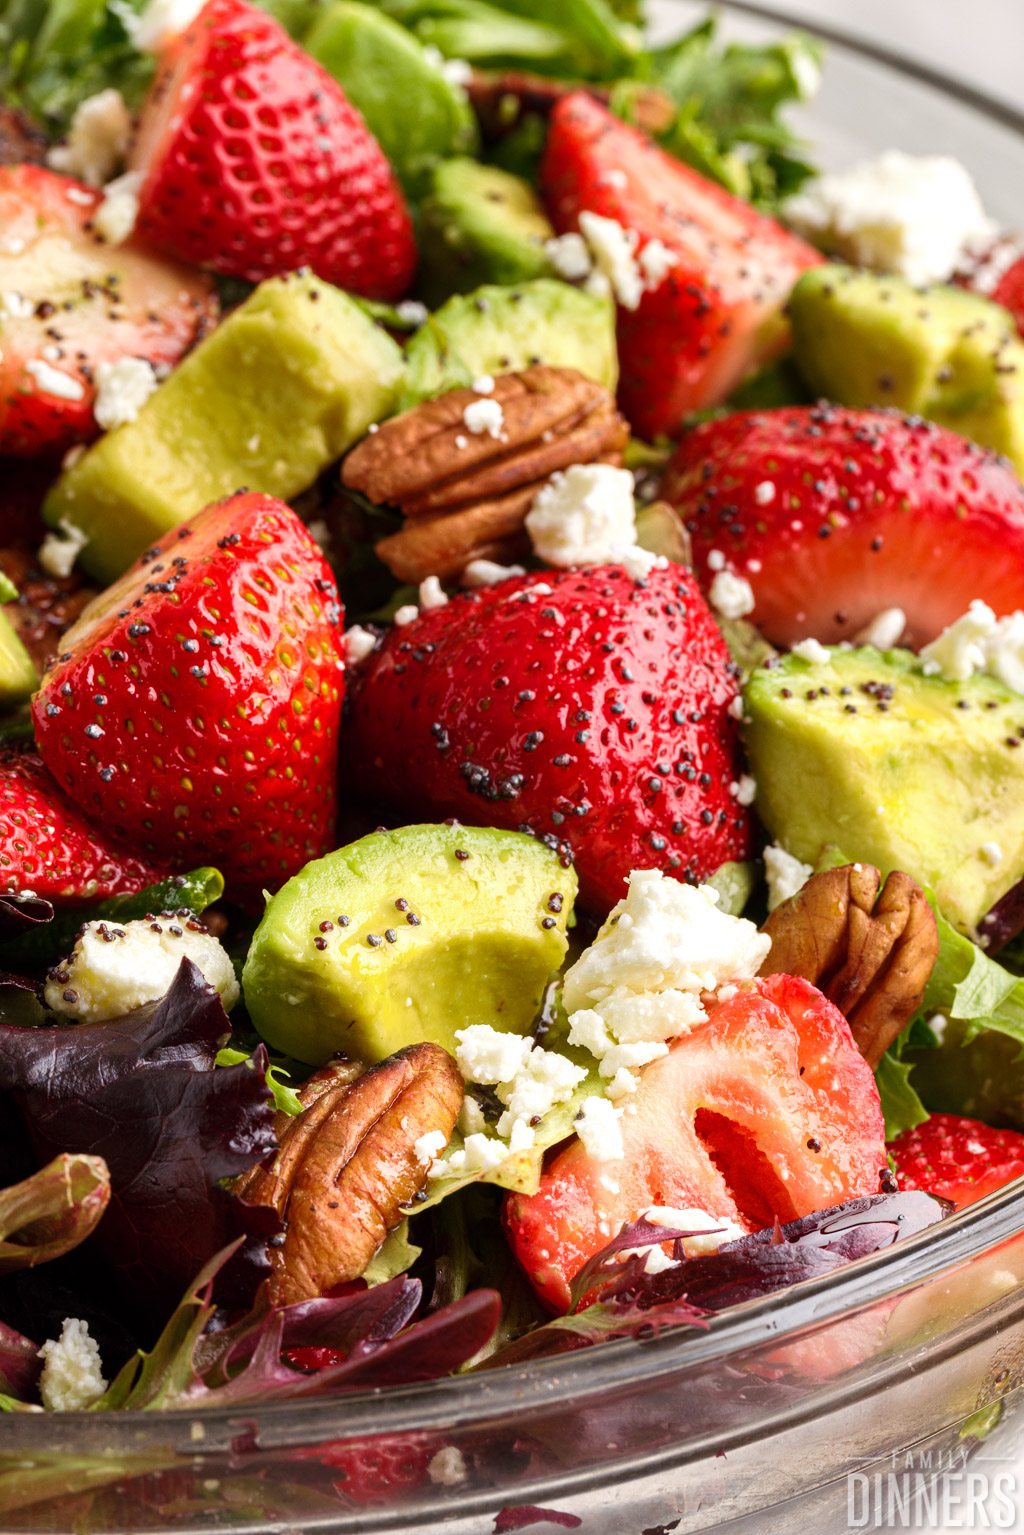 close up of strawberries and avocados in the salad